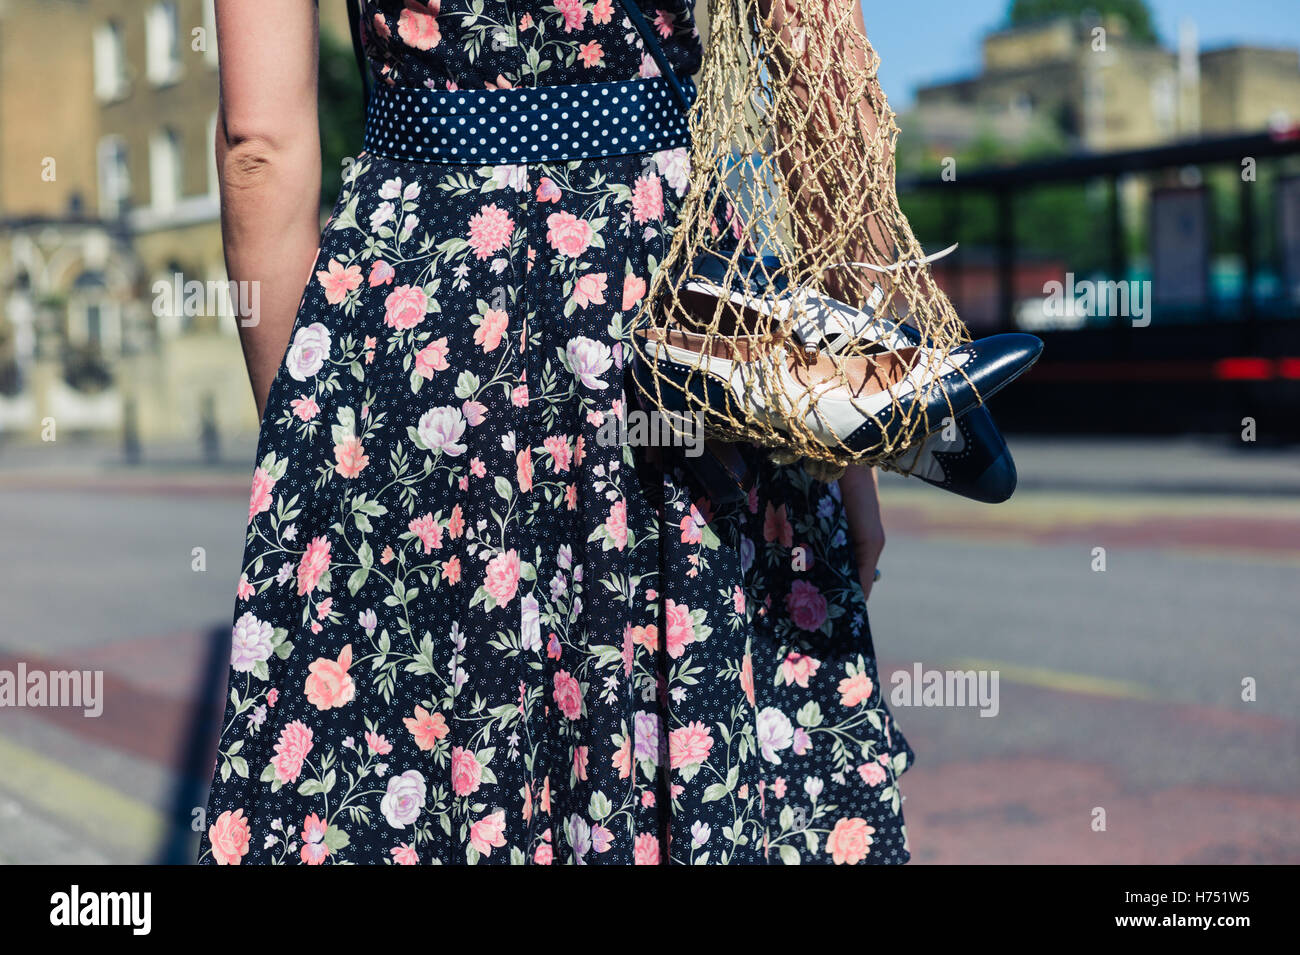 A young woman wearing a dress is standing in the street with a net bag containing a pair of spare party shoes Stock Photo